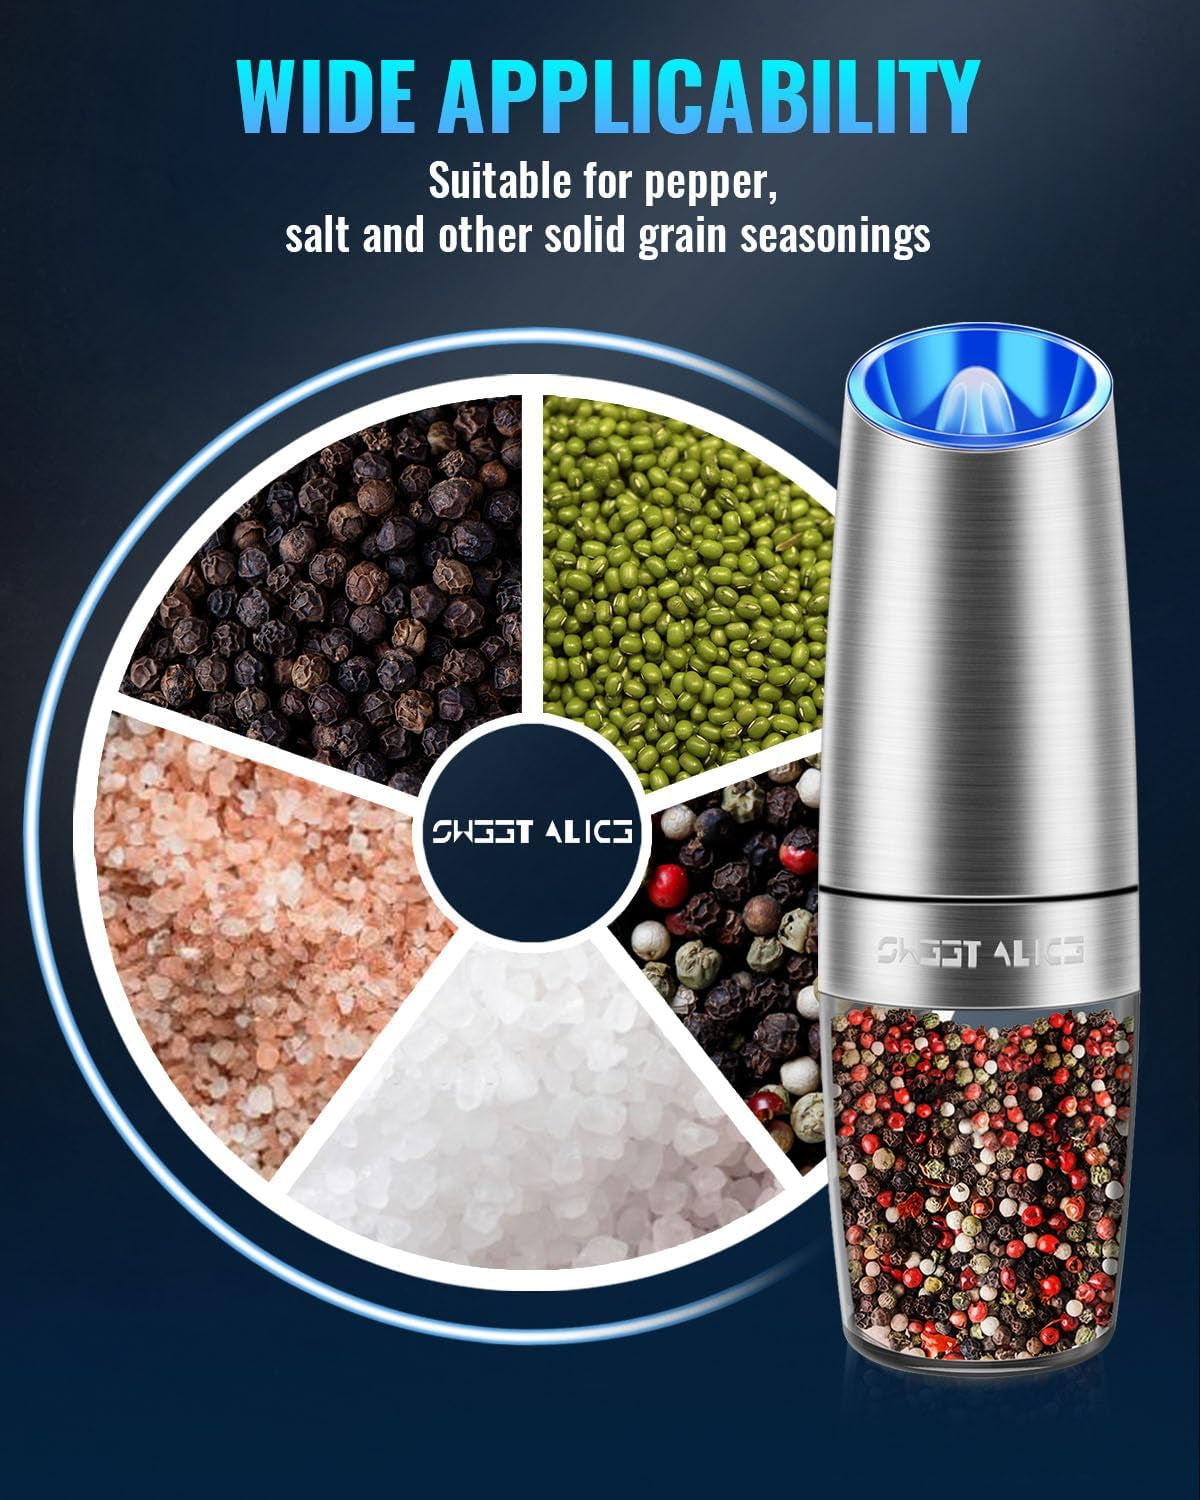 Gravity Electric Pepper and Salt Grinder Set, Salt and Pepper Mill & Adjustable Coarseness, Battery Powered with LED Light, One Hand Automatic Operation, Stainless Steel (Set/Silver)